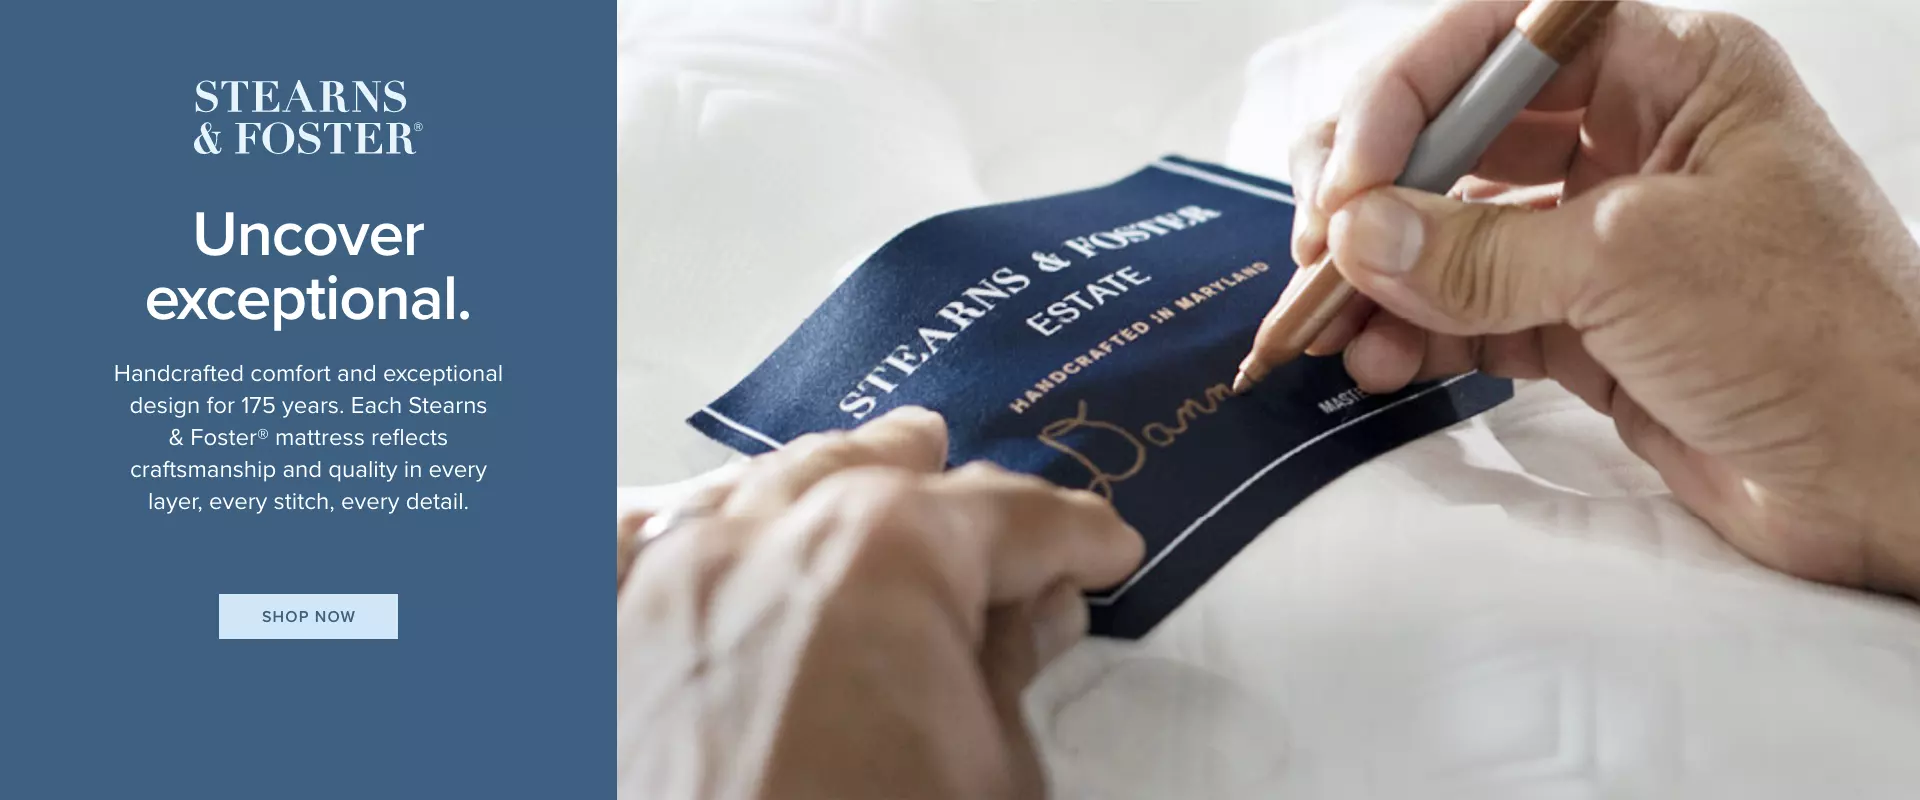 Stearns and Foster Mattresses - Handcrafted comfort and exceptional design for 175 years. Each mattress reflects craftsmanship and quality in every layer, every stitch, every detail.  - Shop Now